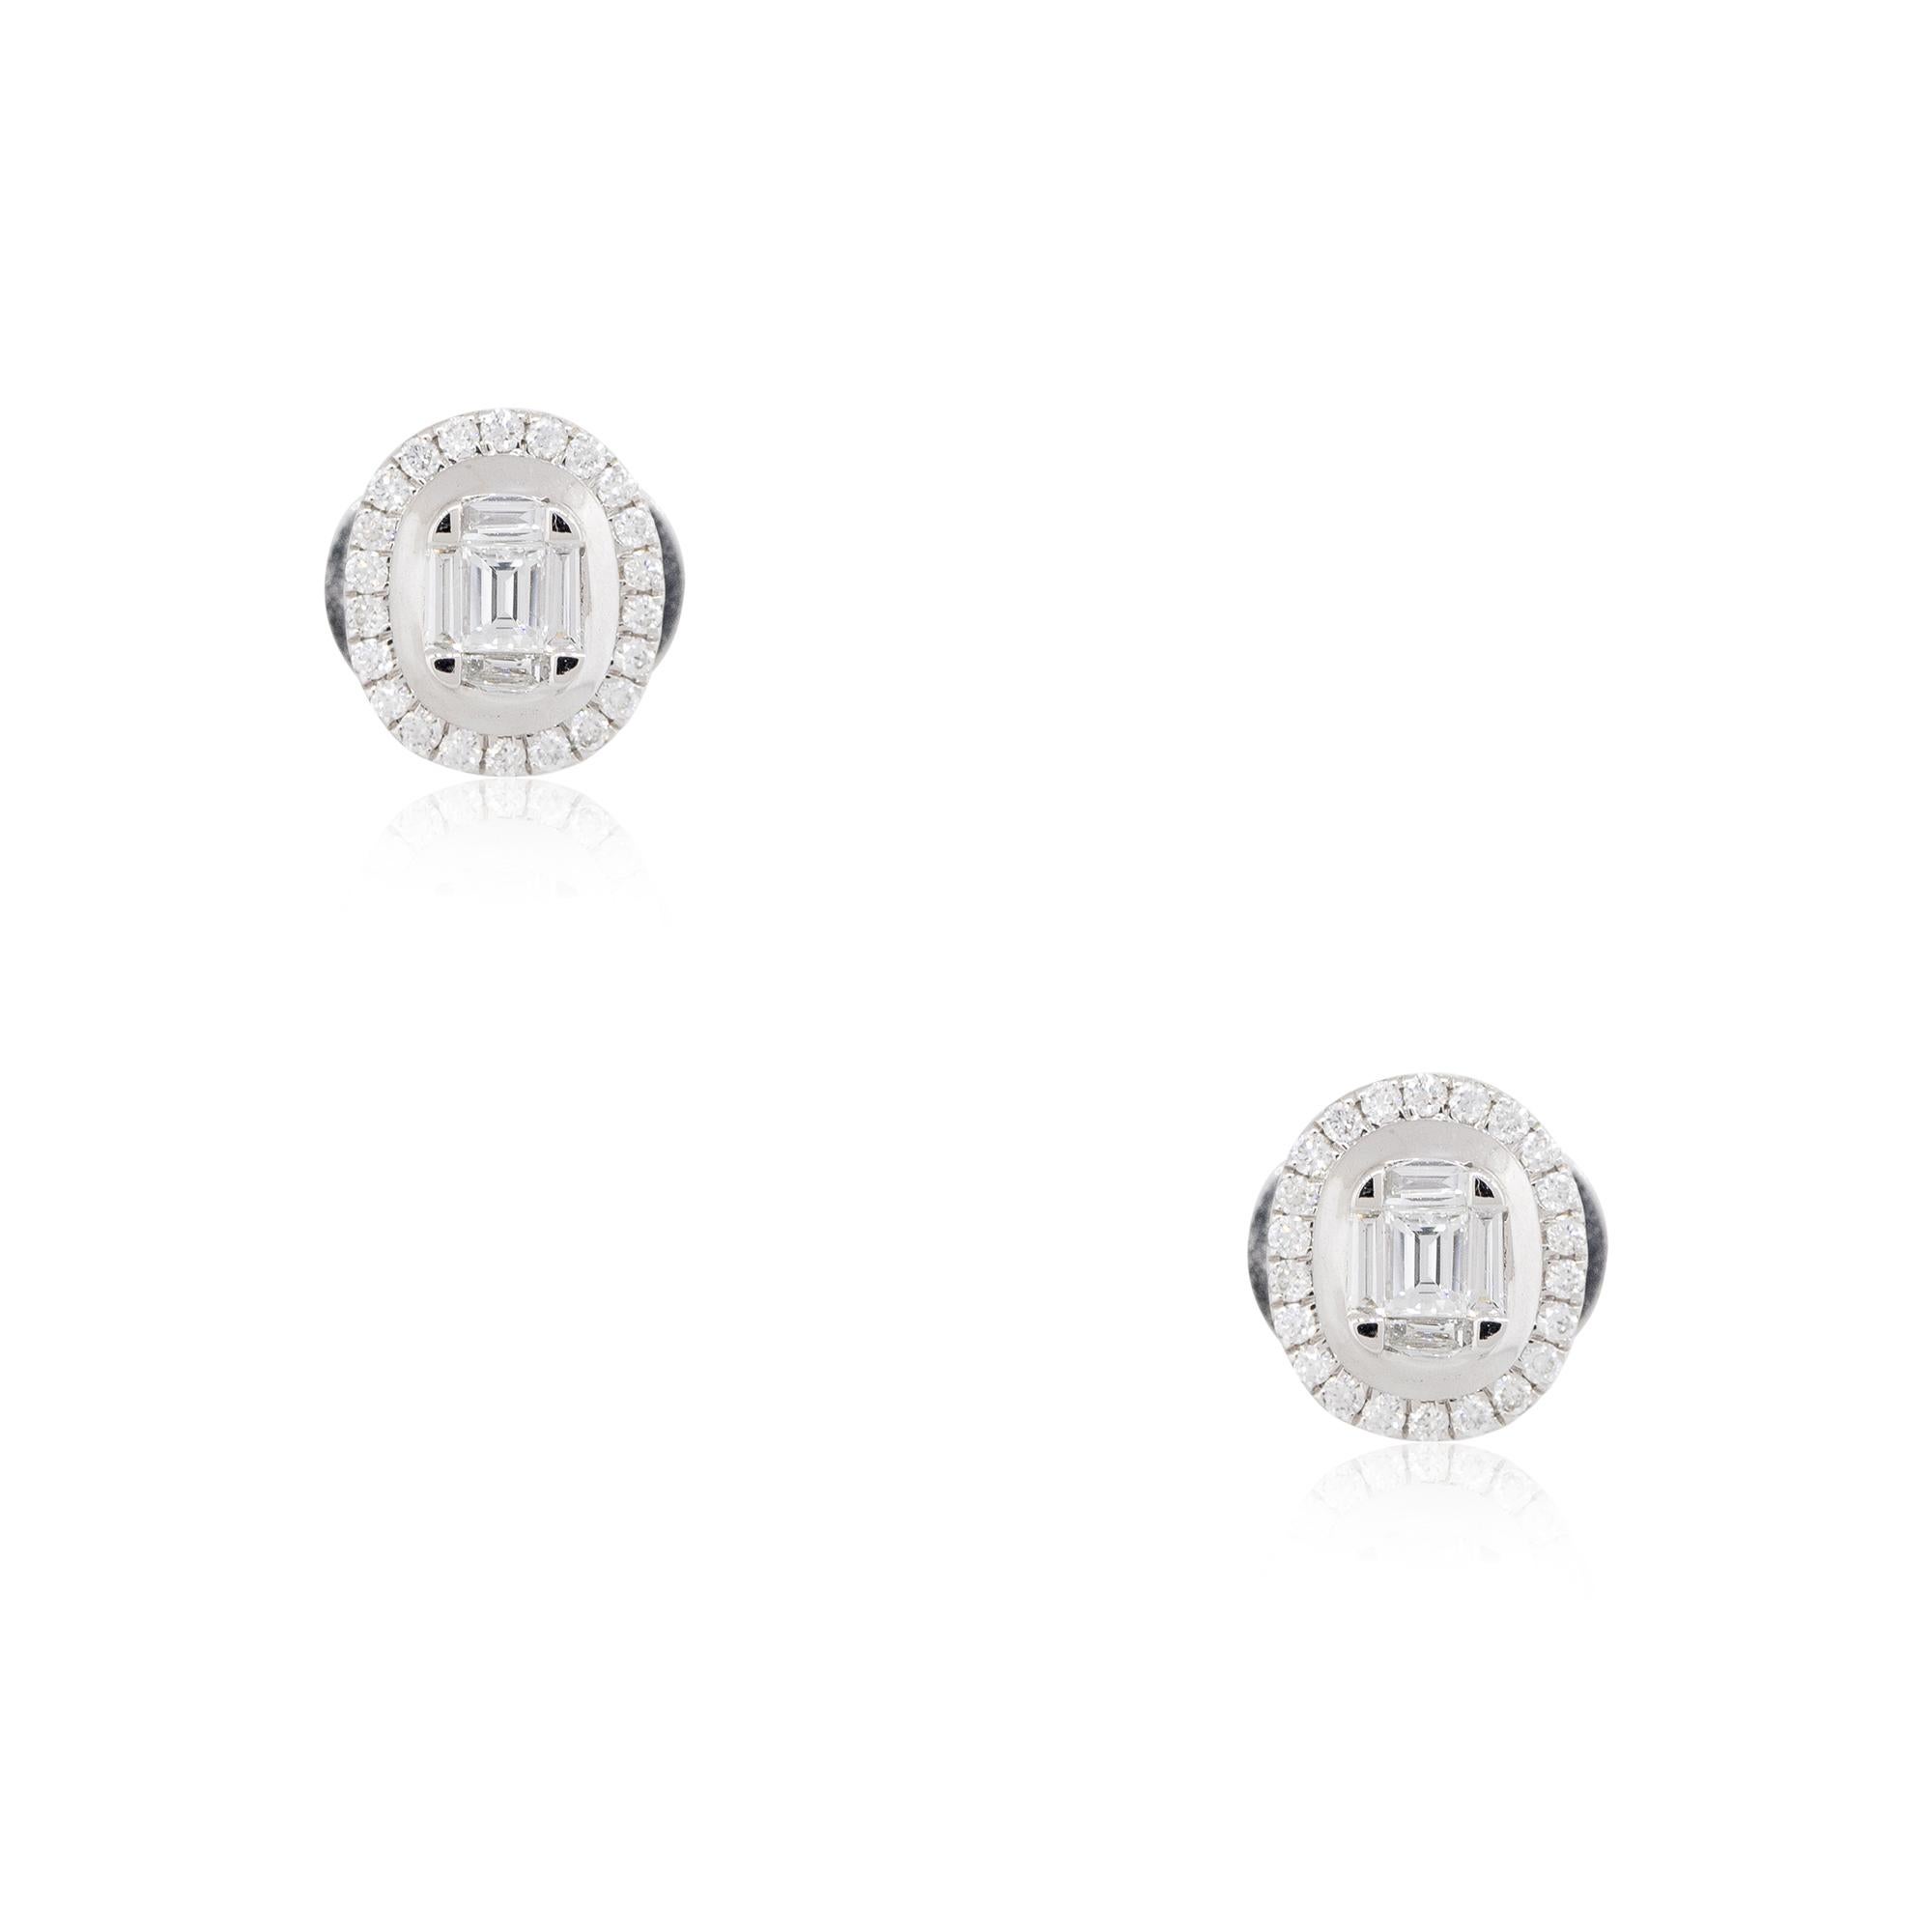 18k White Gold 0.47ctw Baguette & Round Brilliant Cut Stud Earrings
Product: Baguette & Round Brilliant Diamond Stud Earrings
Material: 18k White Gold
Diamond Details: There are approximately 0.19 carats of Round Brilliant cut diamonds (44 stones)